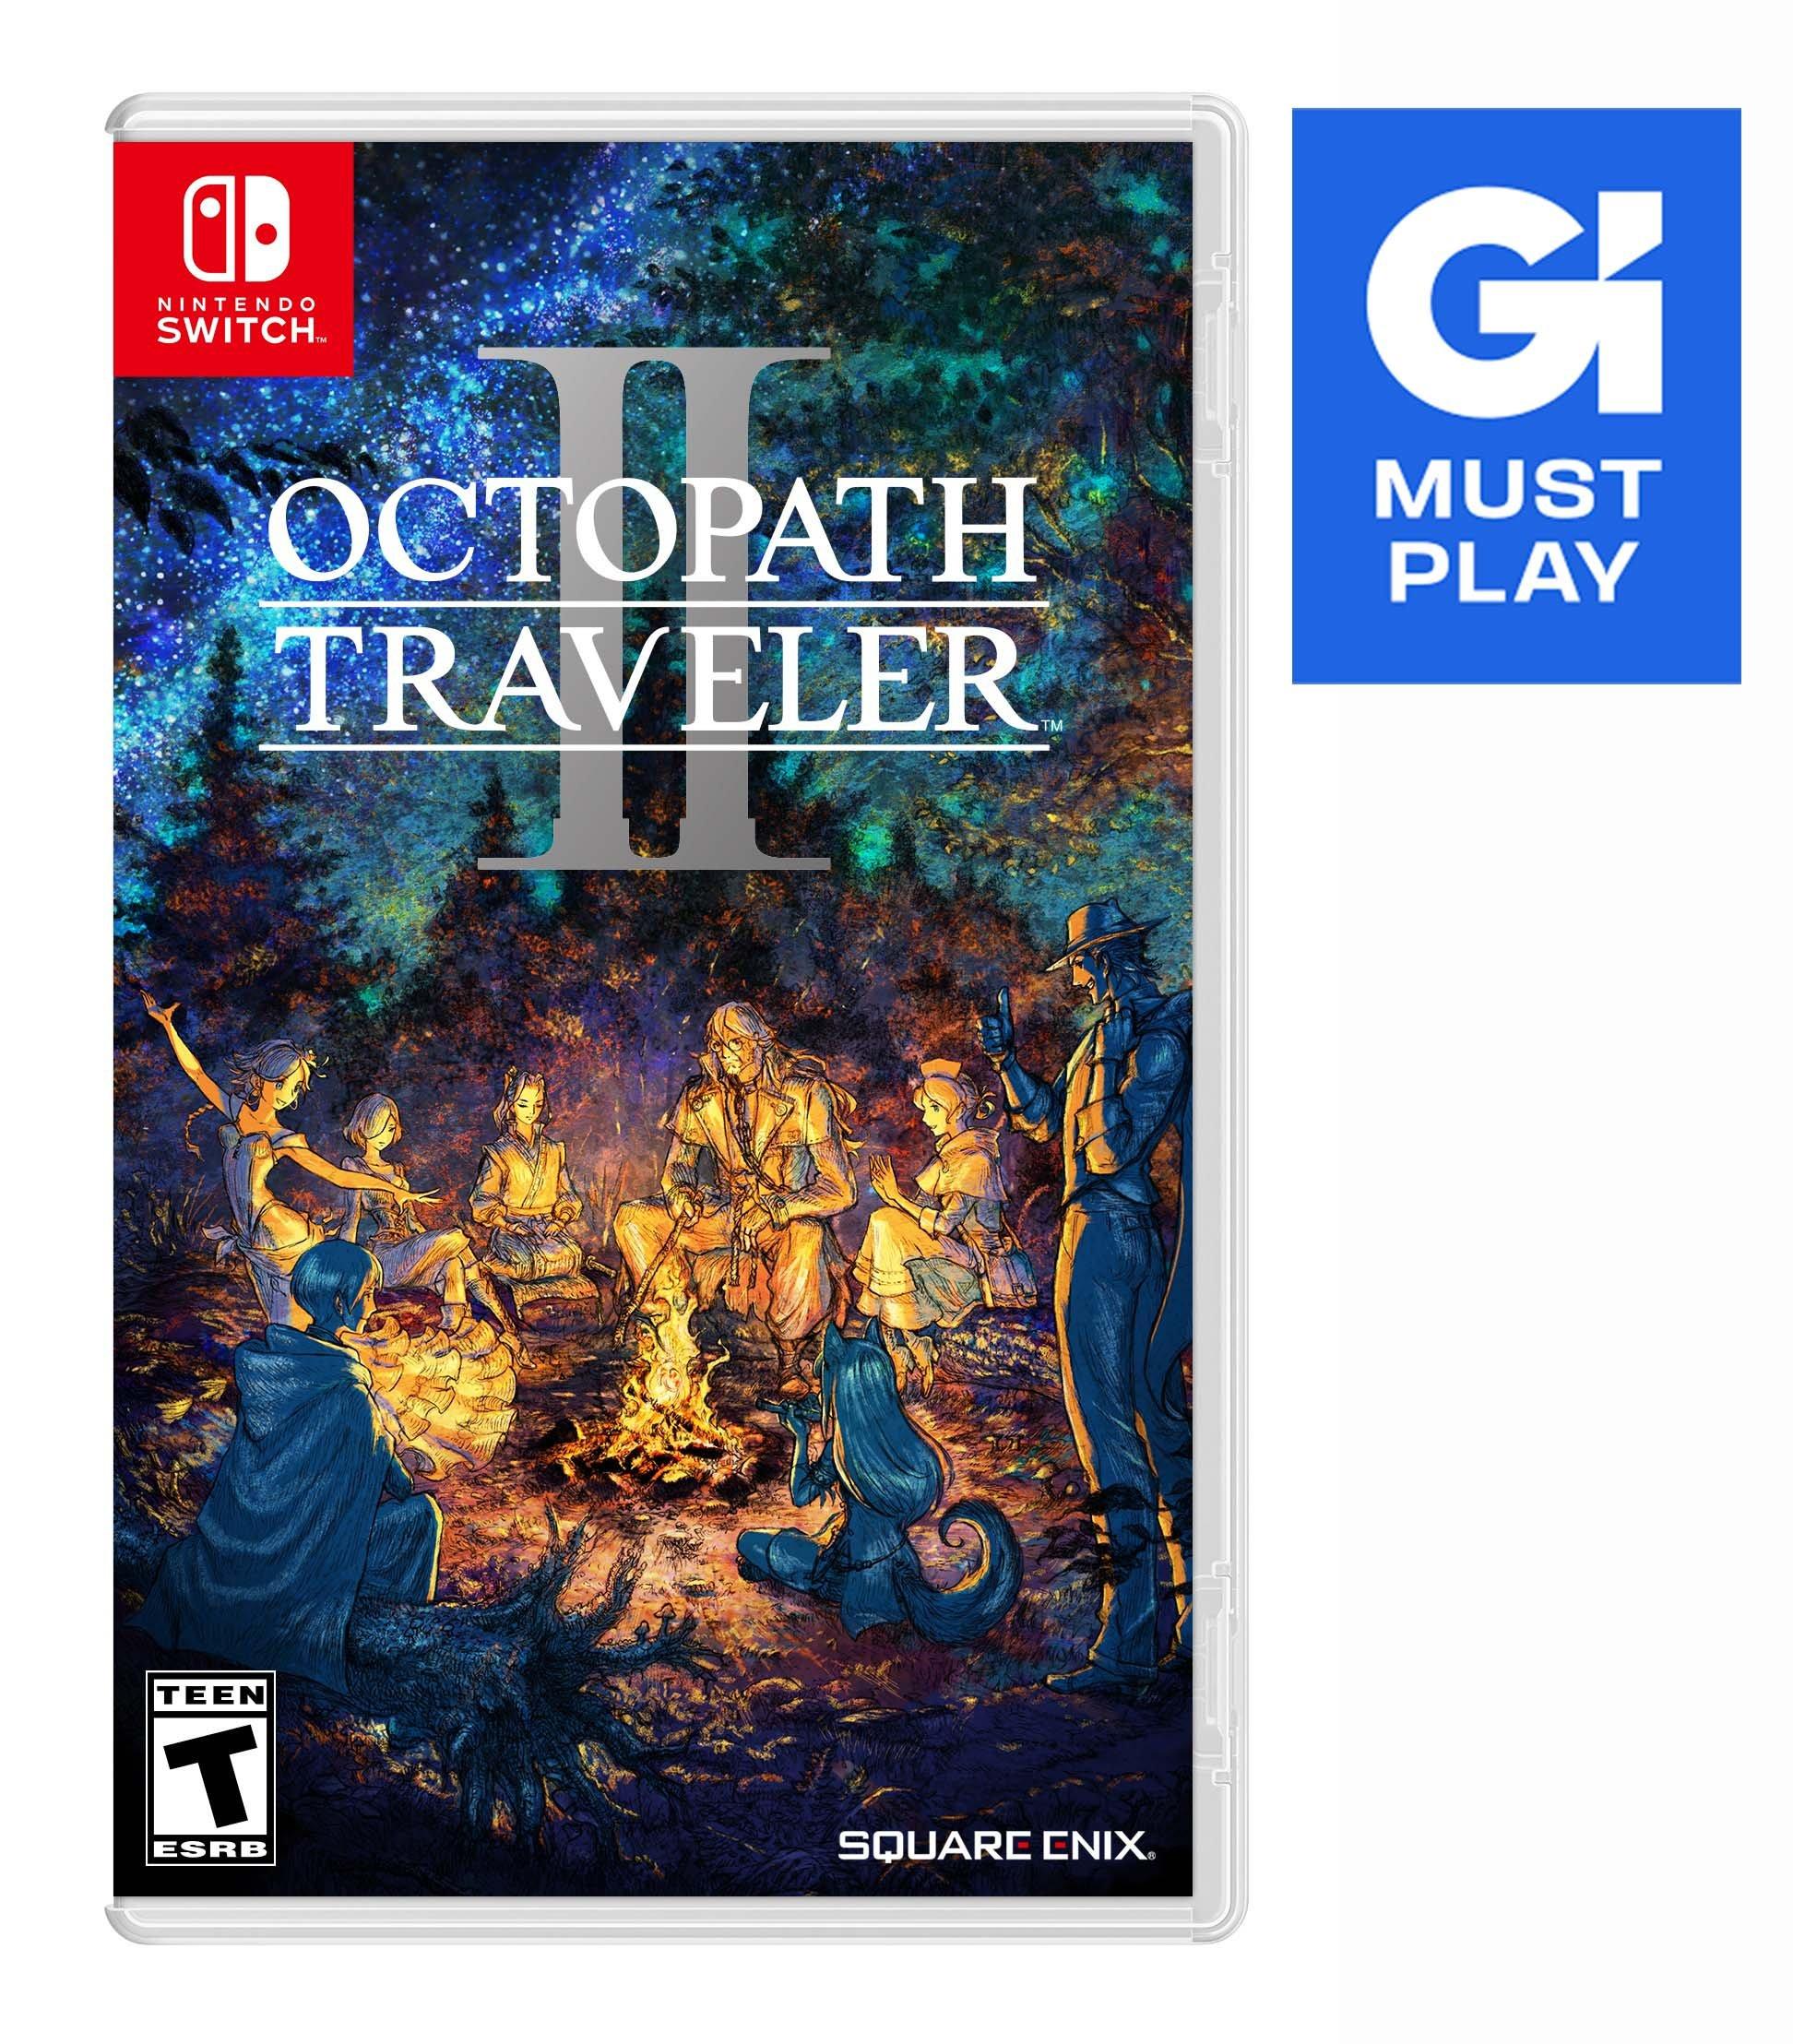 OCTOPATH TRAVELER 2 (SWITCH) cheap - Price of $29.62